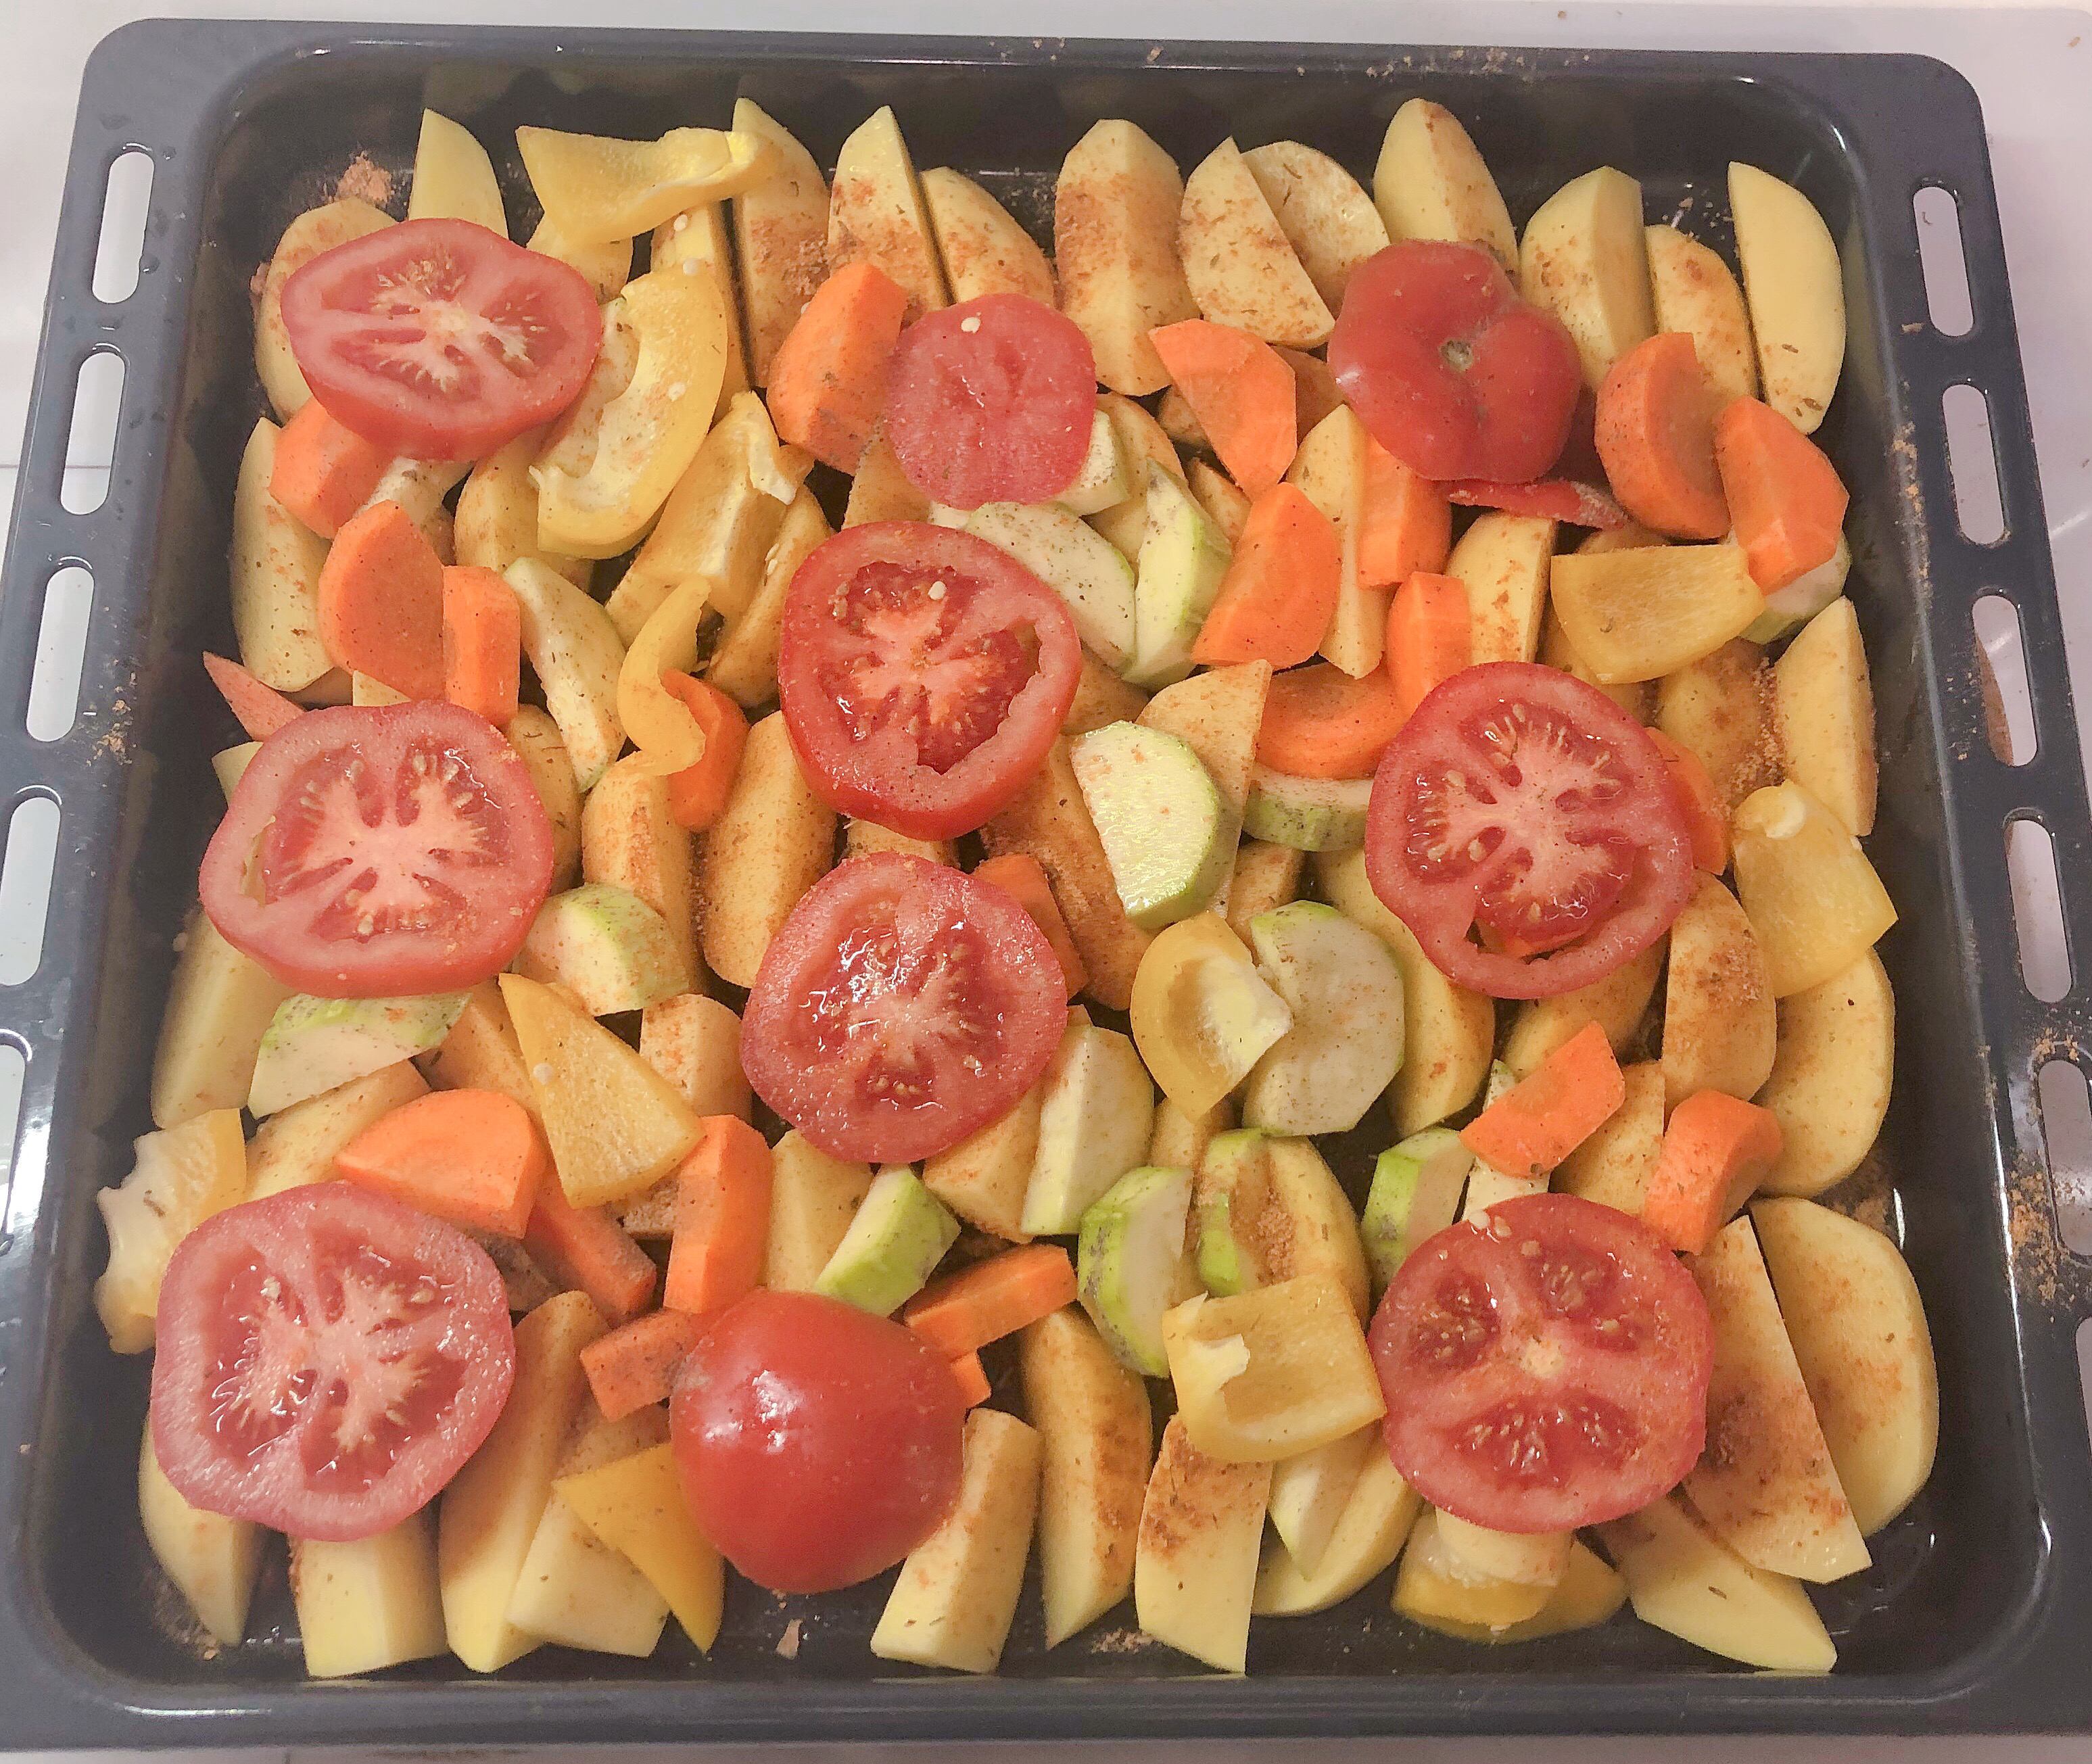 Potato slices with vegetables are ready for baking